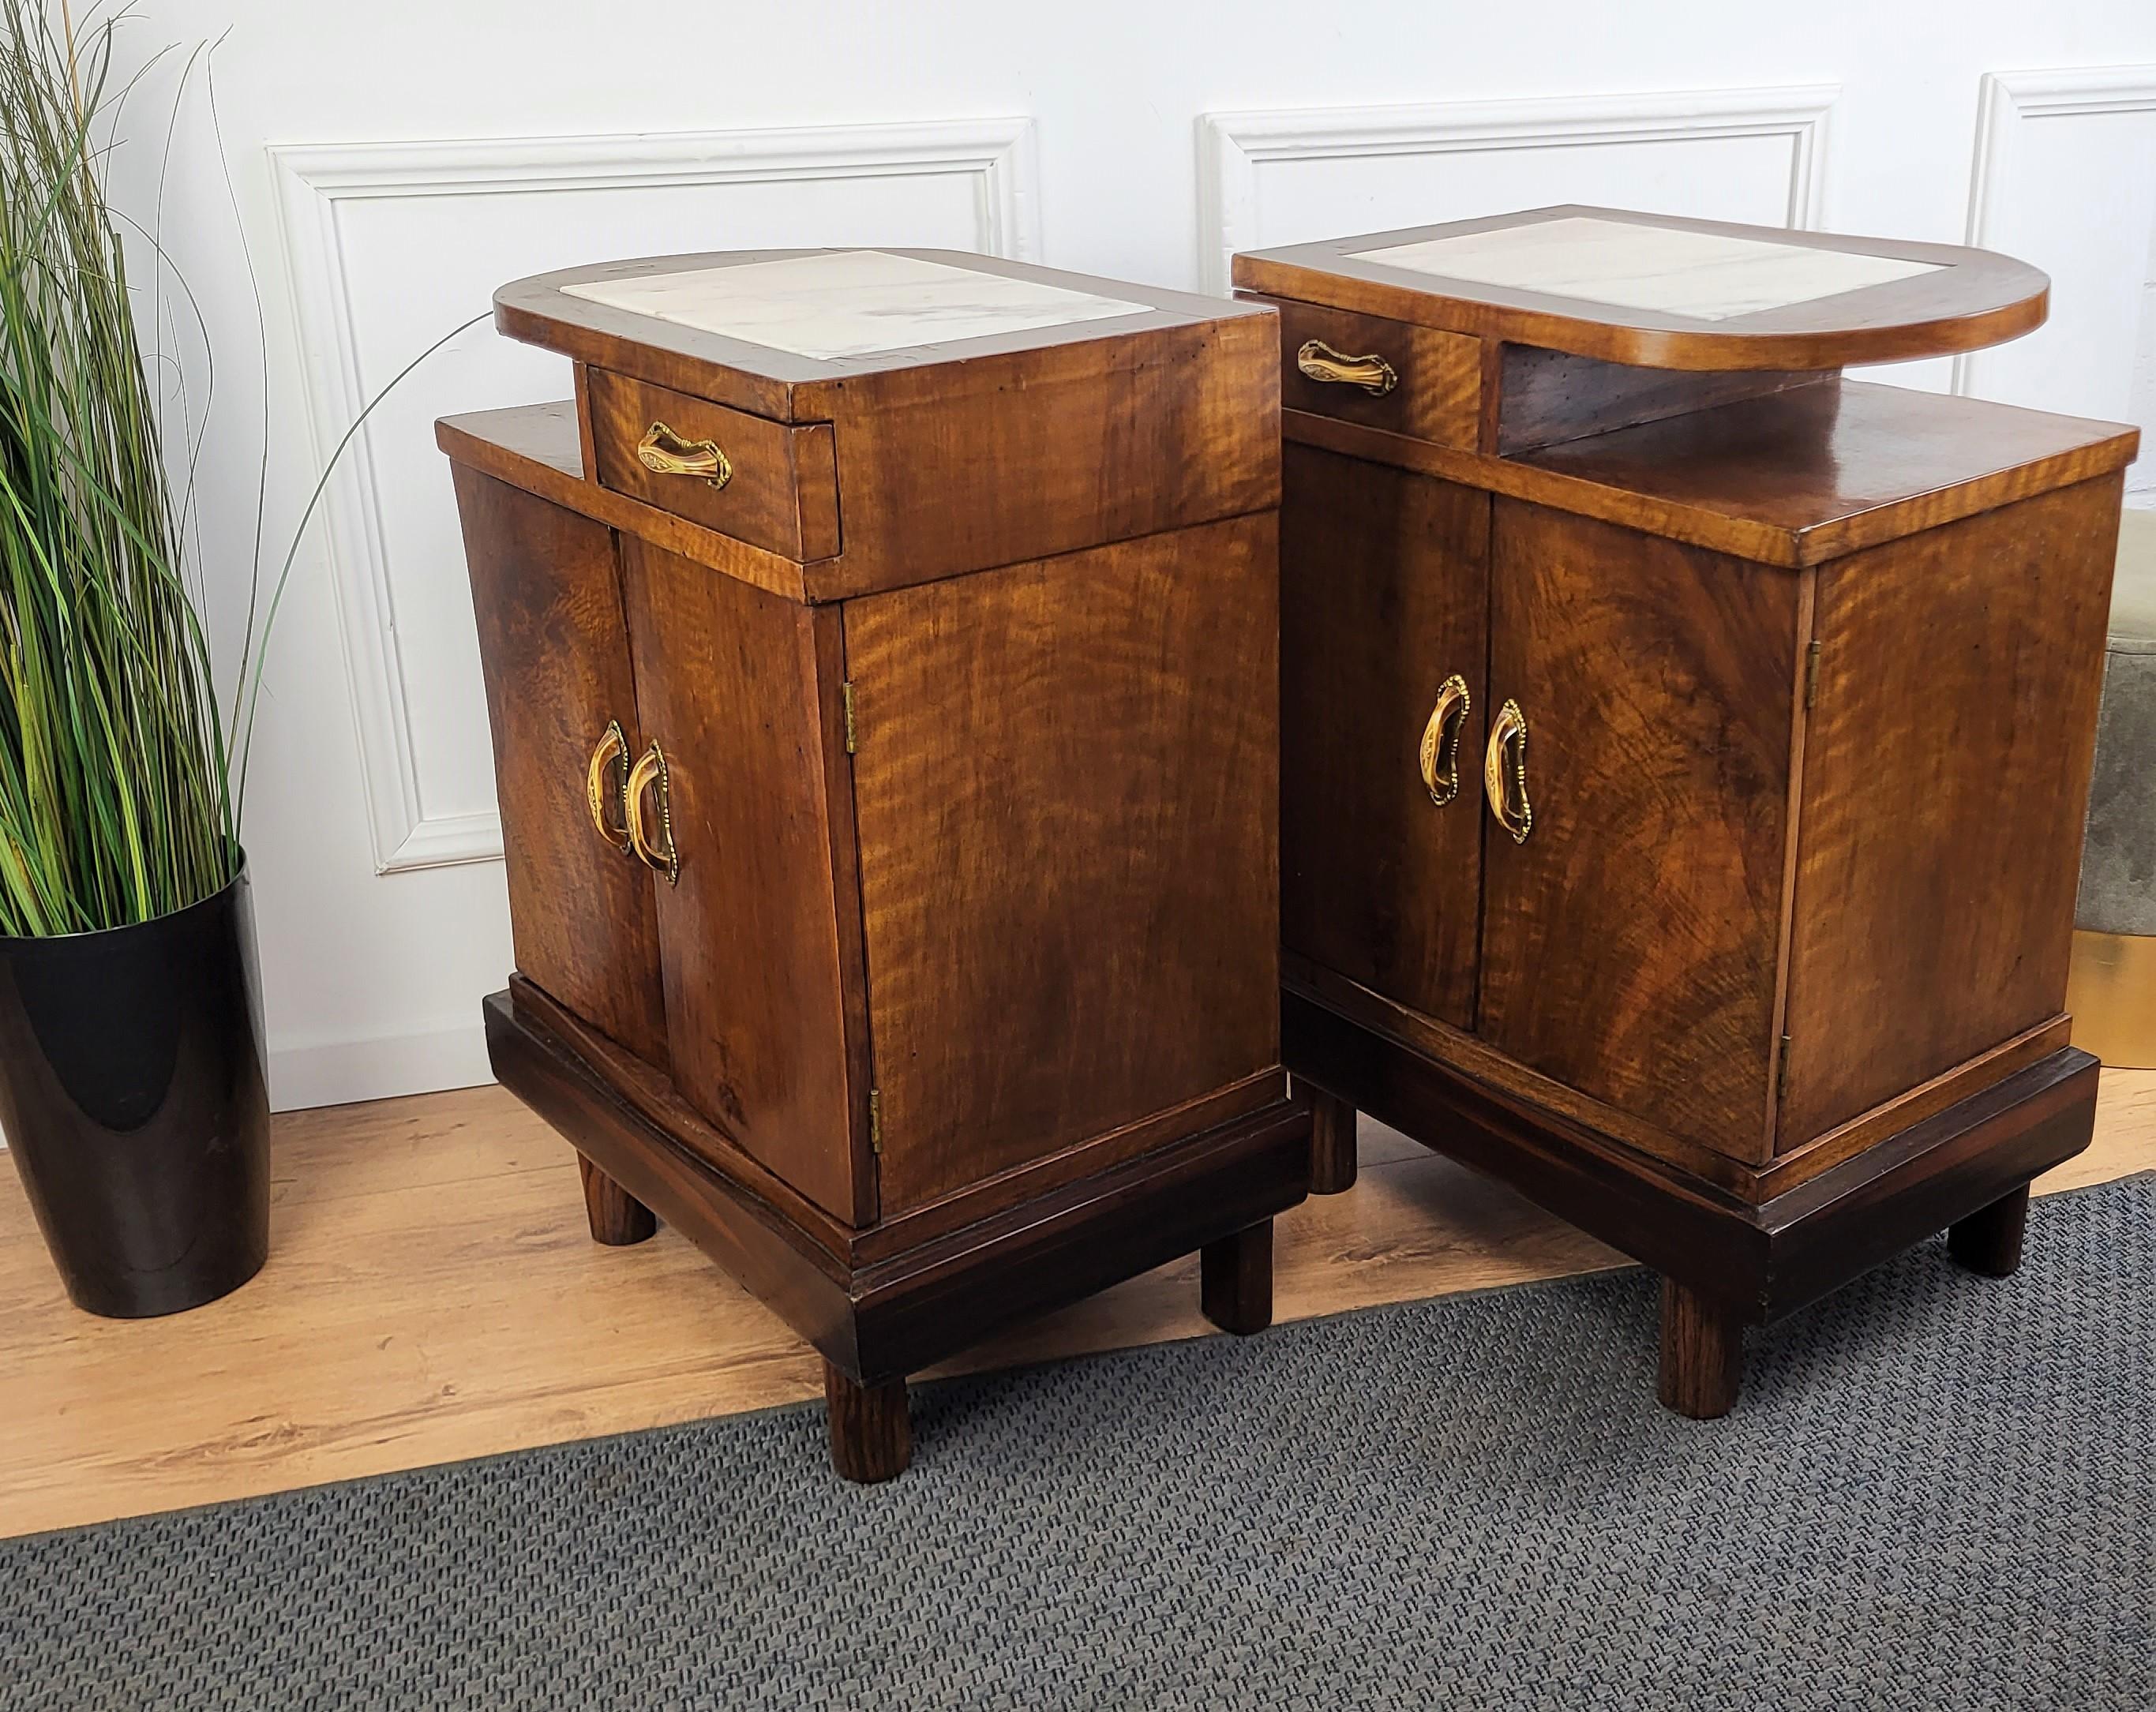 20th Century Pair of Italian Art Deco Nightstand bedside Tables in Burl Walnut and Marble Top